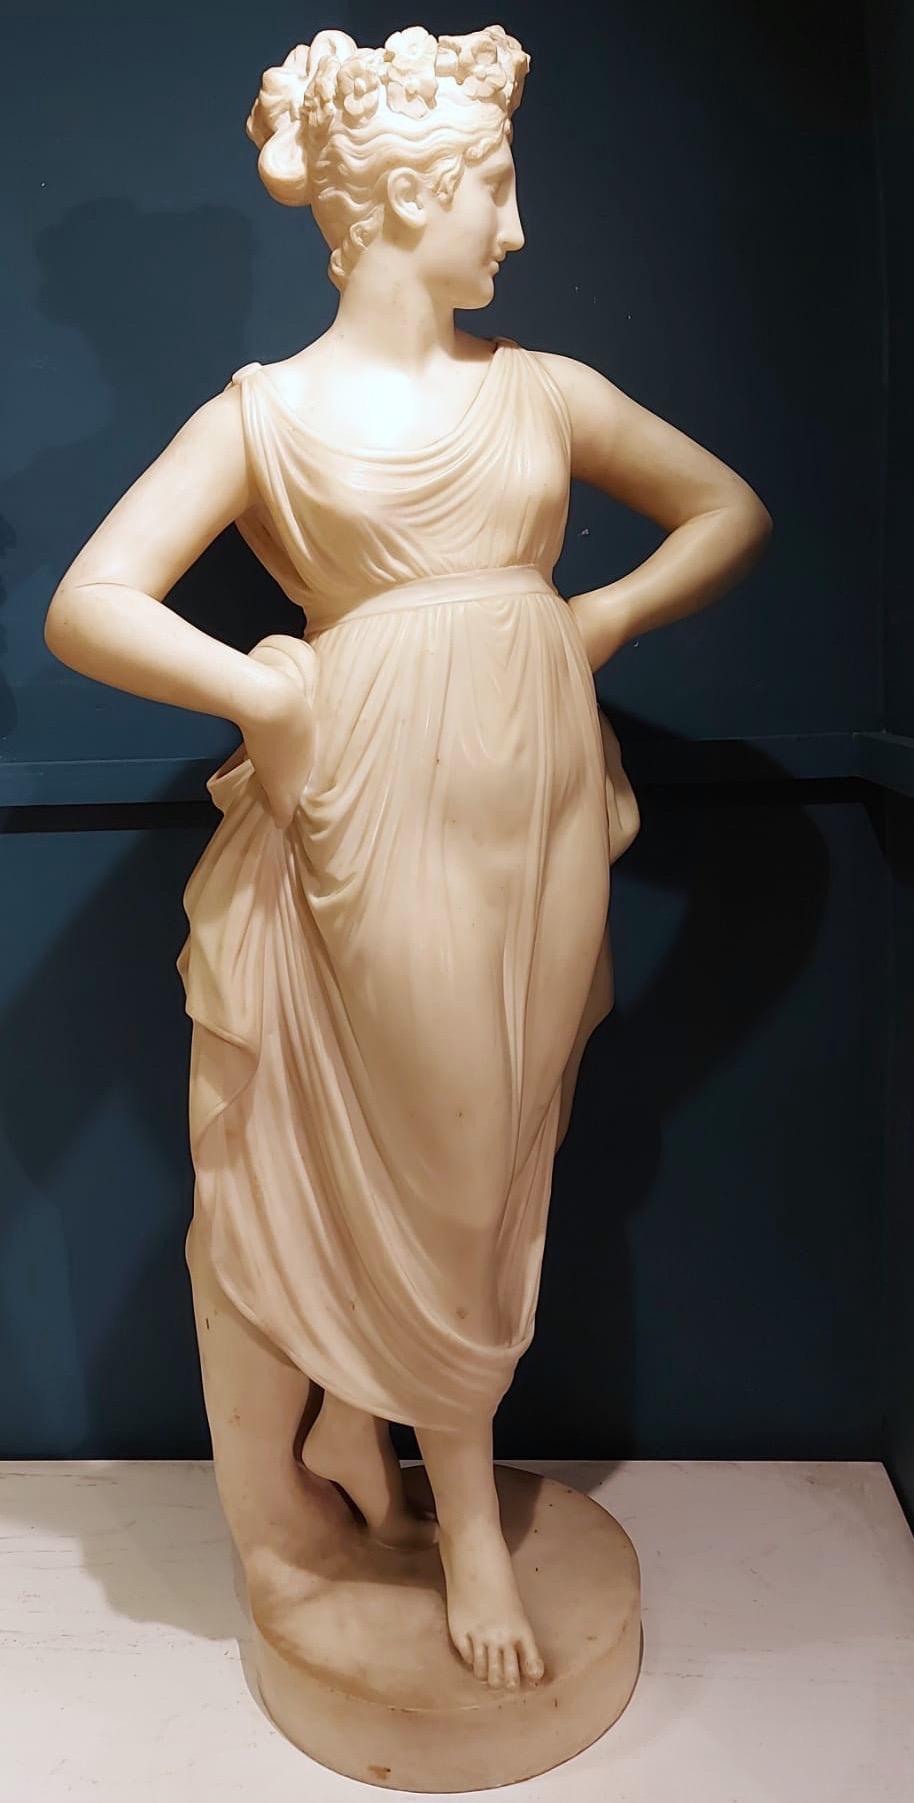  Neoclassical White Marble Sculpture of the DANCER  1870  1